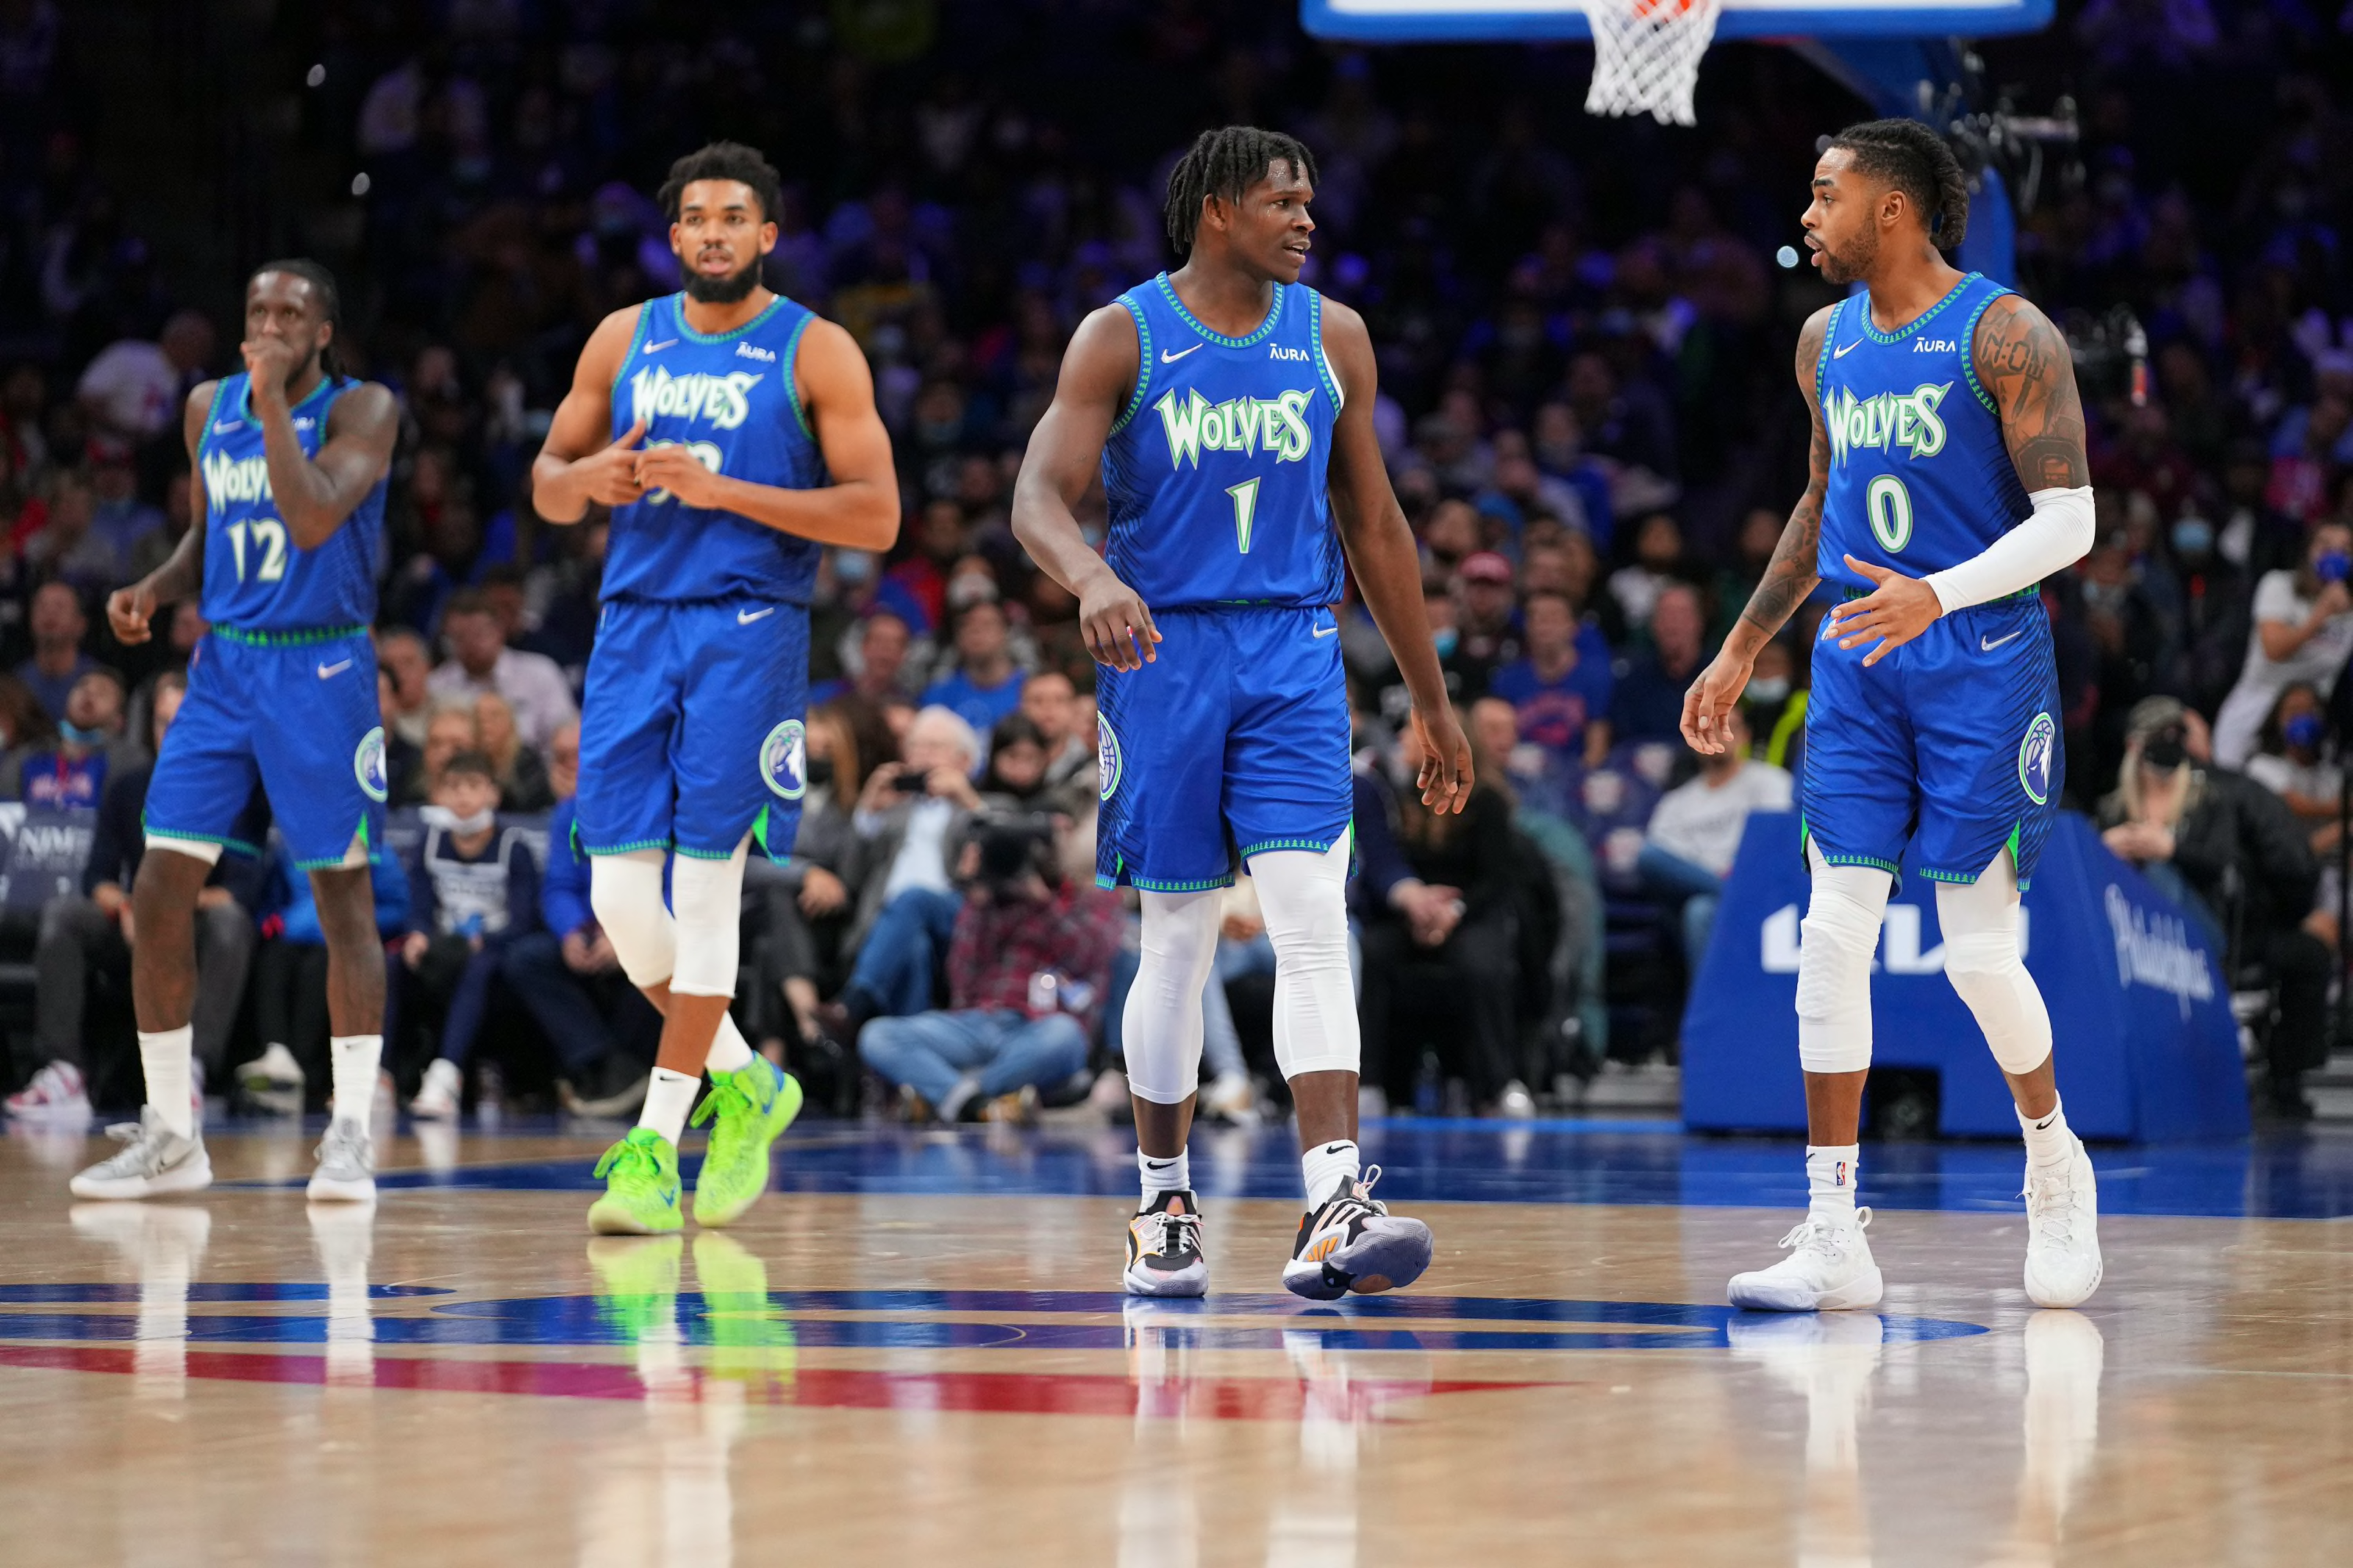 Can the Minnesota Timberwolves be title contenders soon?